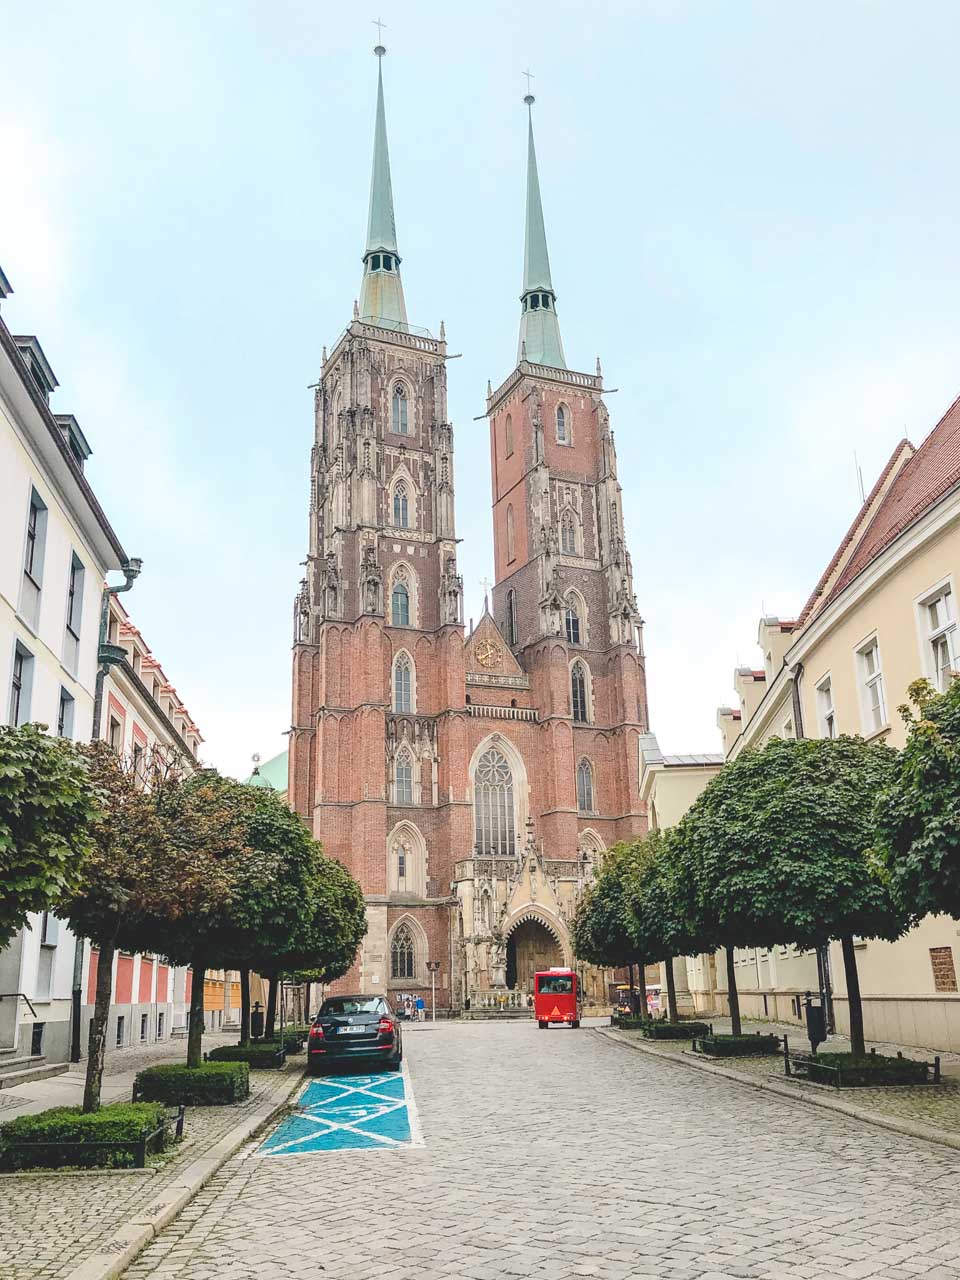 A paved alley lined with trees leading to the Cathedral of St. John the Baptist in Wrocław